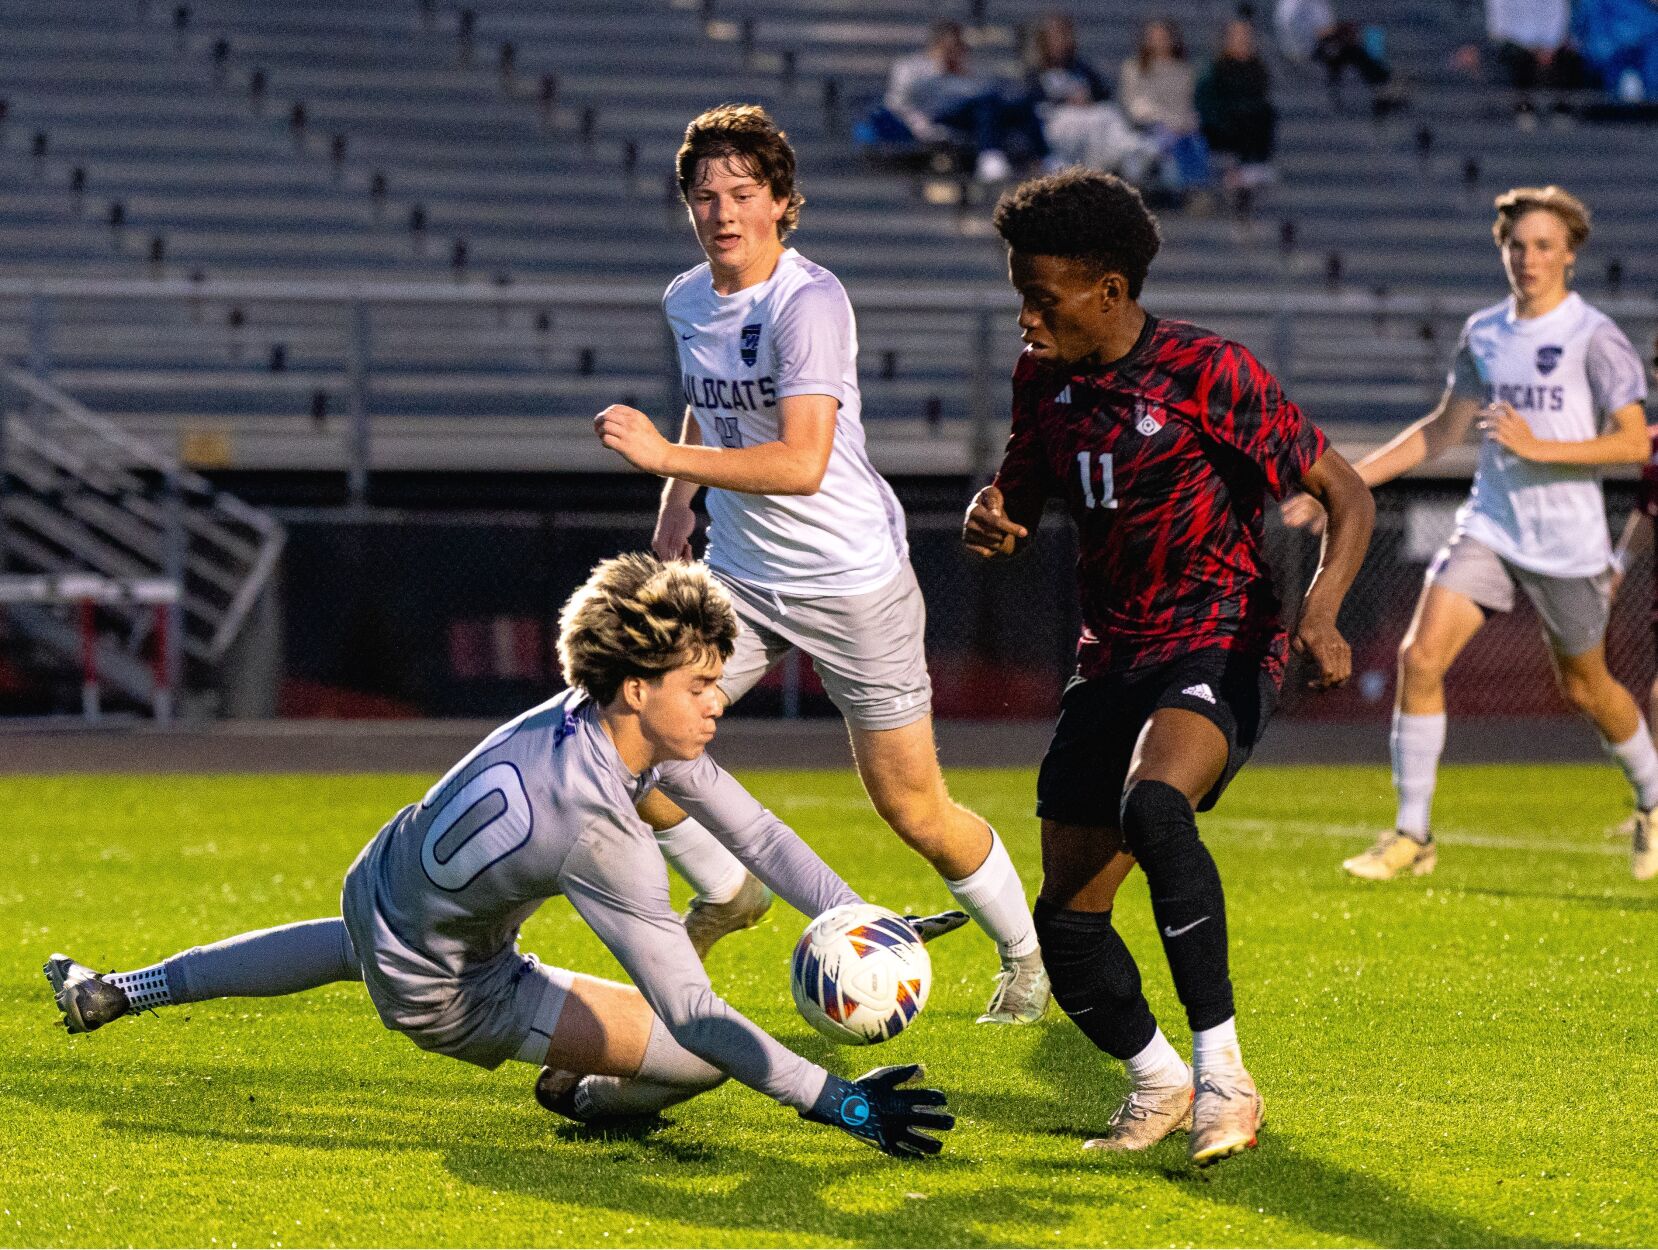 Stratford High Boys Soccer Team Wins 4th Game in 5 Matches